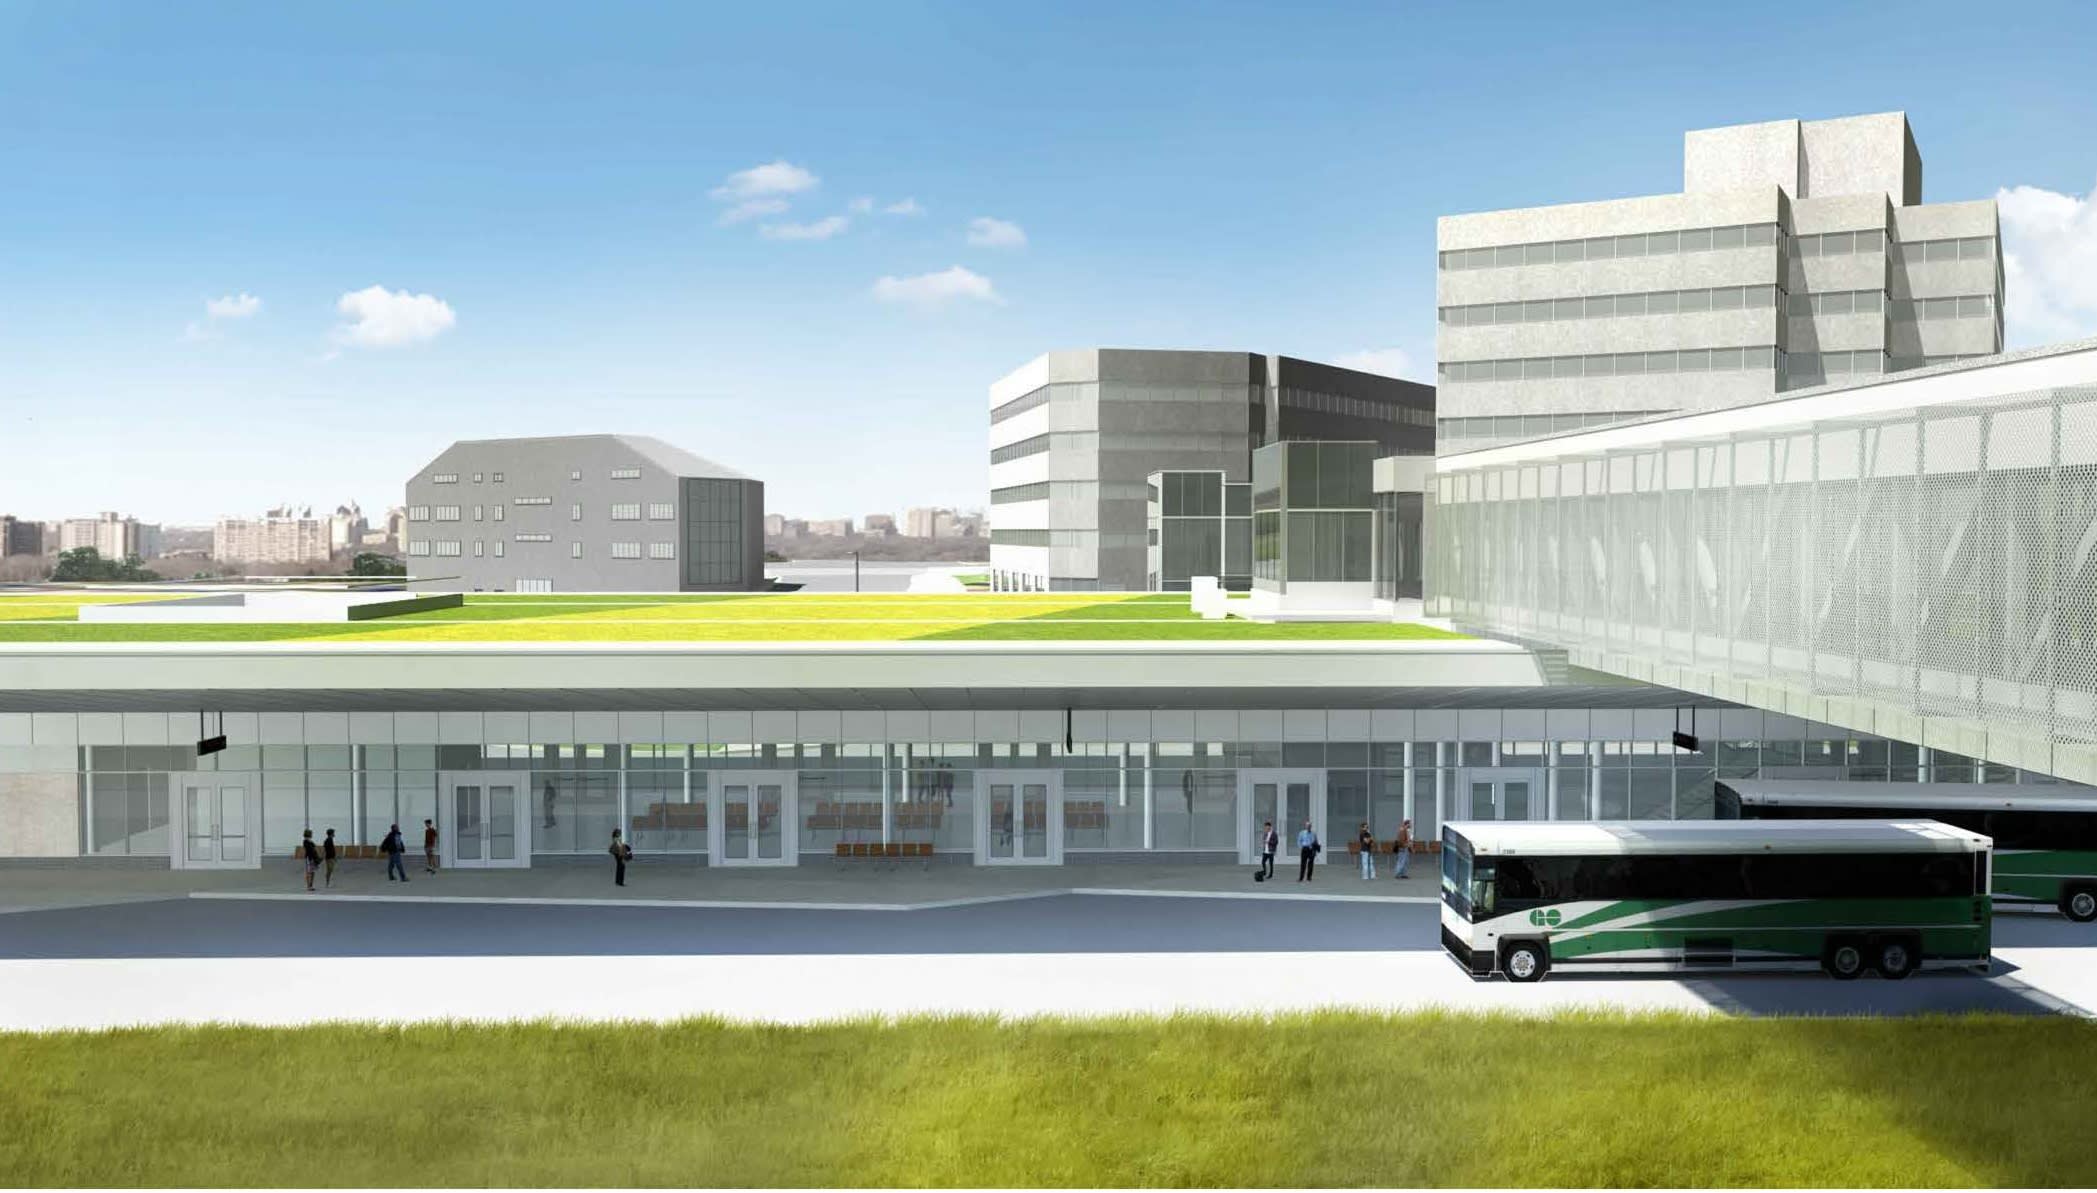 Rendering shows what the Kipling station will look like. A large station, with a bus pulling up i...